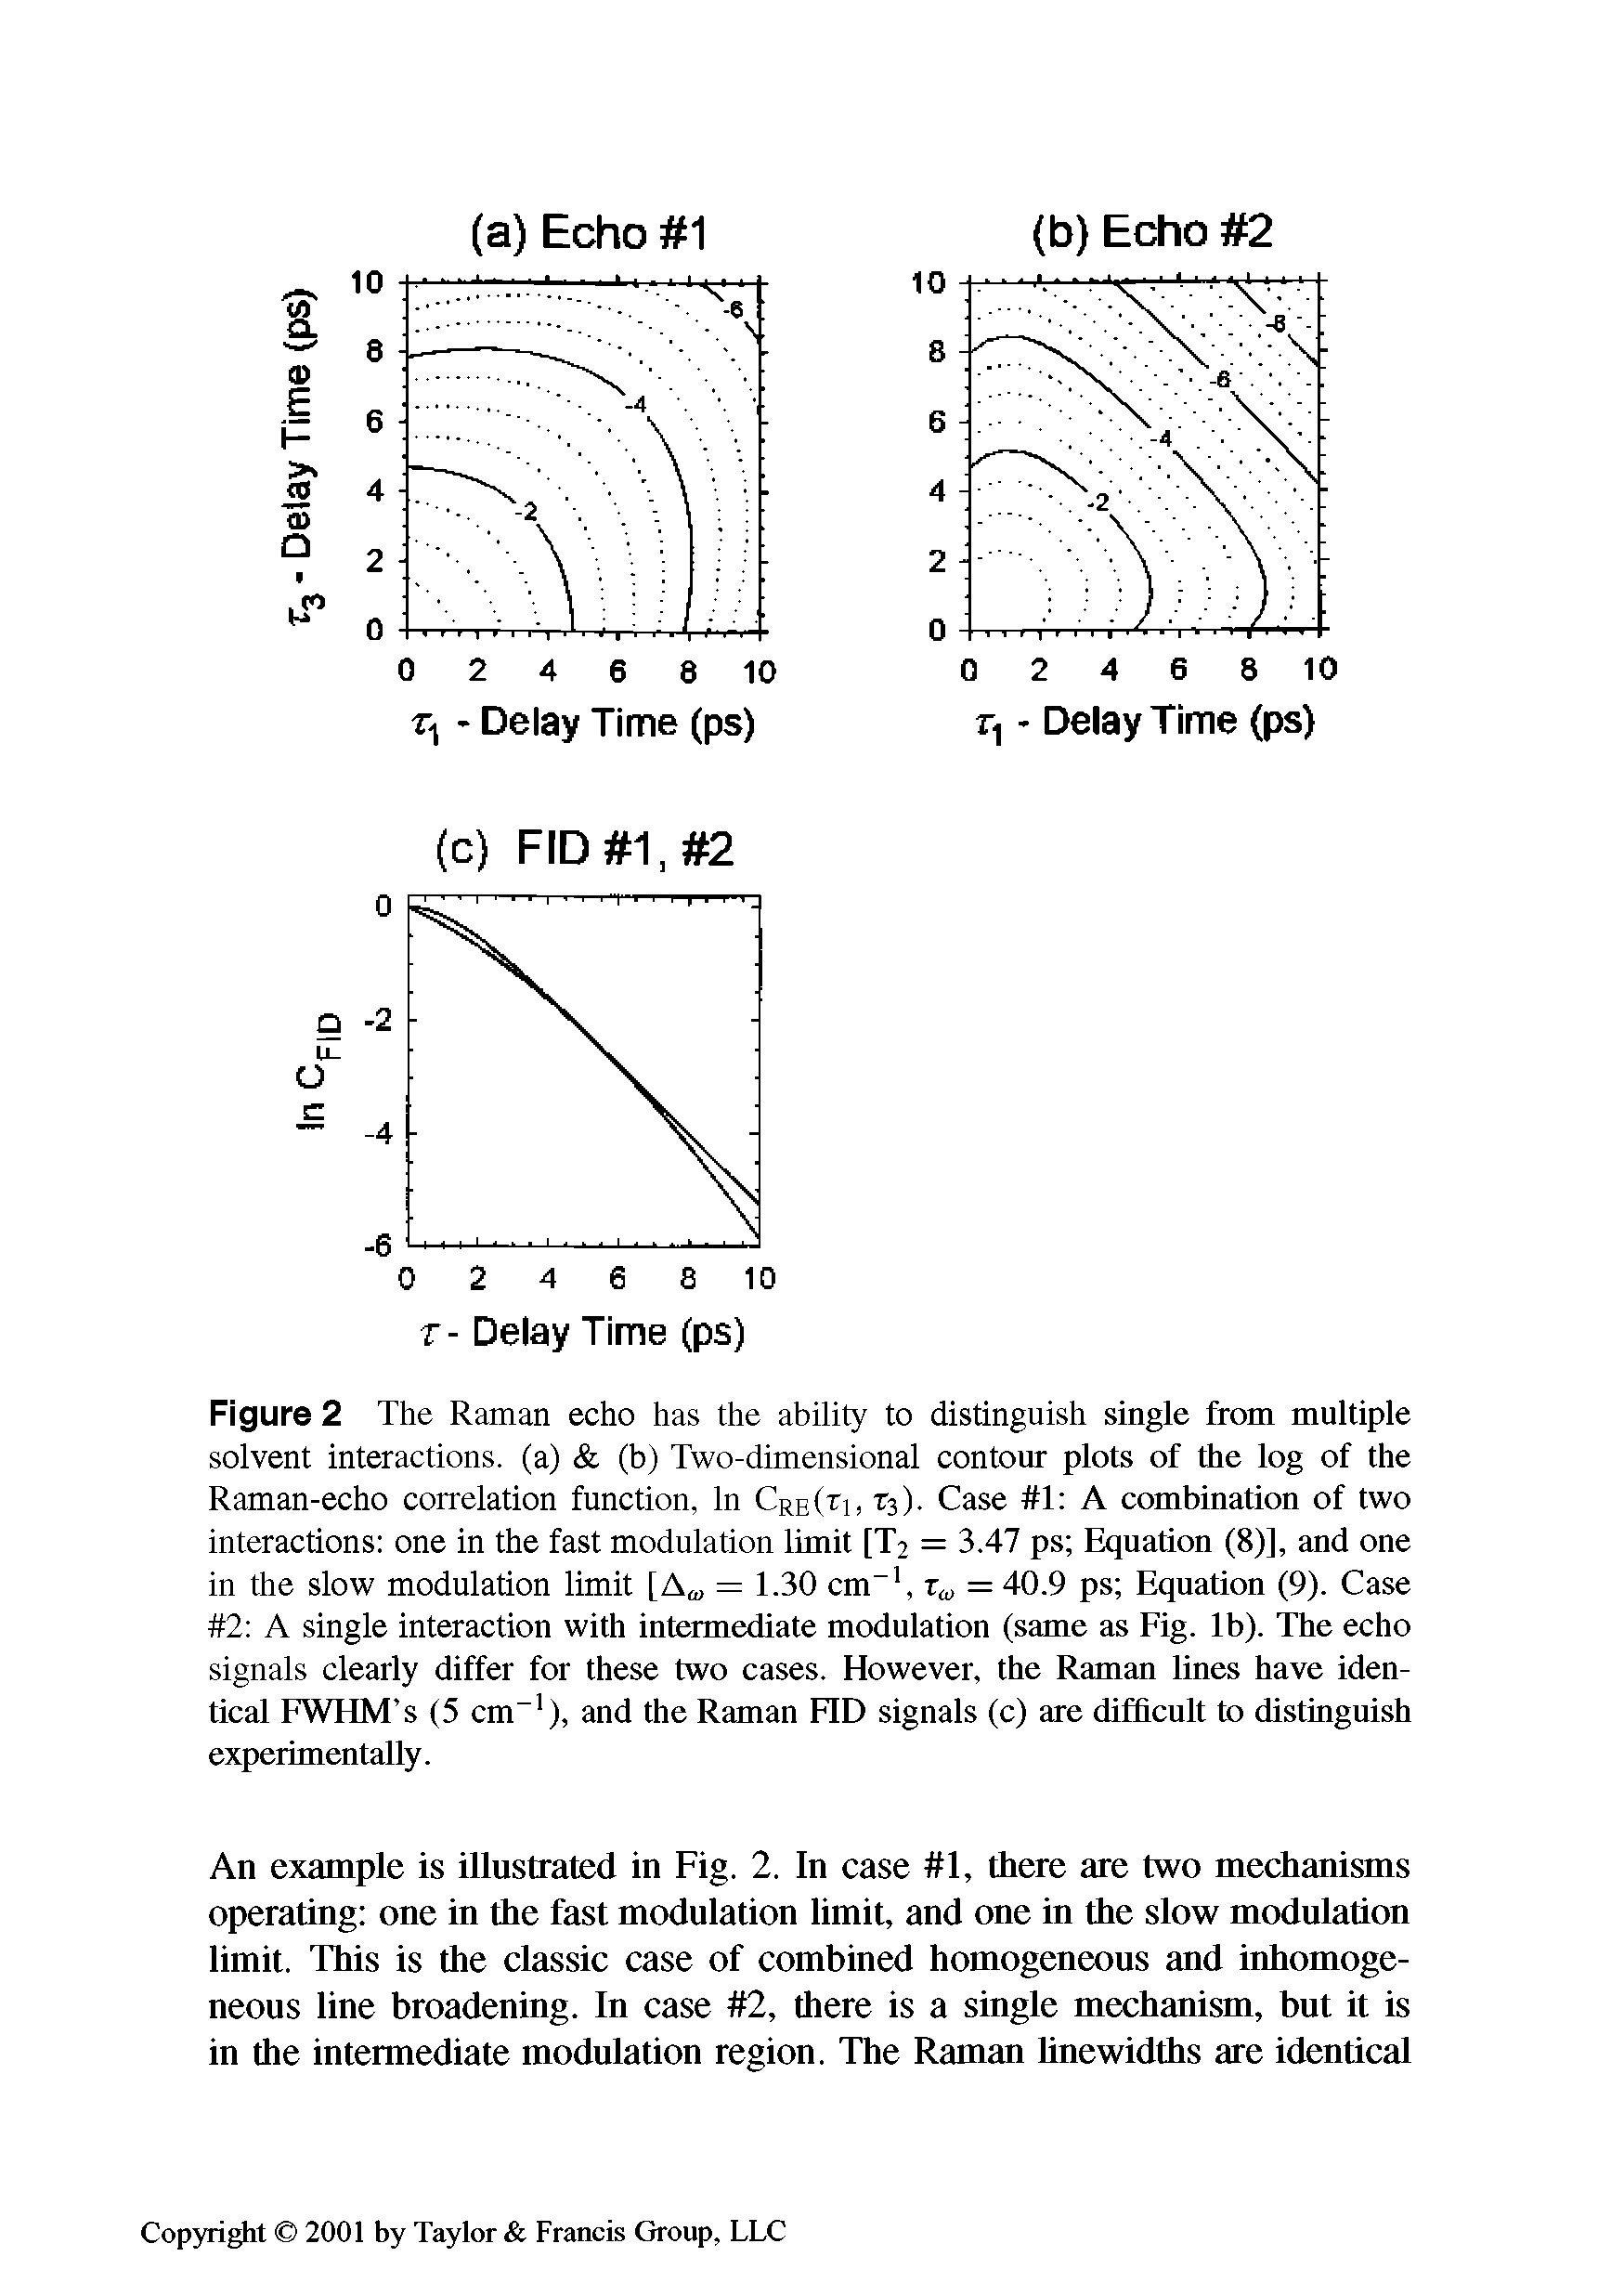 Figure 2 The Raman echo has the ability to distinguish single from multiple solvent interactions, (a) (b) Two-dimensional contour plots of the log of the Raman-echo correlation function, In Cre(ti, T3). Case 1 A combination of two interactions one in the fast modulation limit [T2 = 3.47 ps Equation (8)], and one in the slow modulation limit A, = 1.30 cm-1, r( = 40.9 ps Equation (9). Case 2 A single interaction with intermediate modulation (same as Fig. lb). The echo signals clearly differ for these two cases. However, the Raman lines have identical FWHM s (5 cm-1), and the Raman FID signals (c) are difficult to distinguish experimentally.